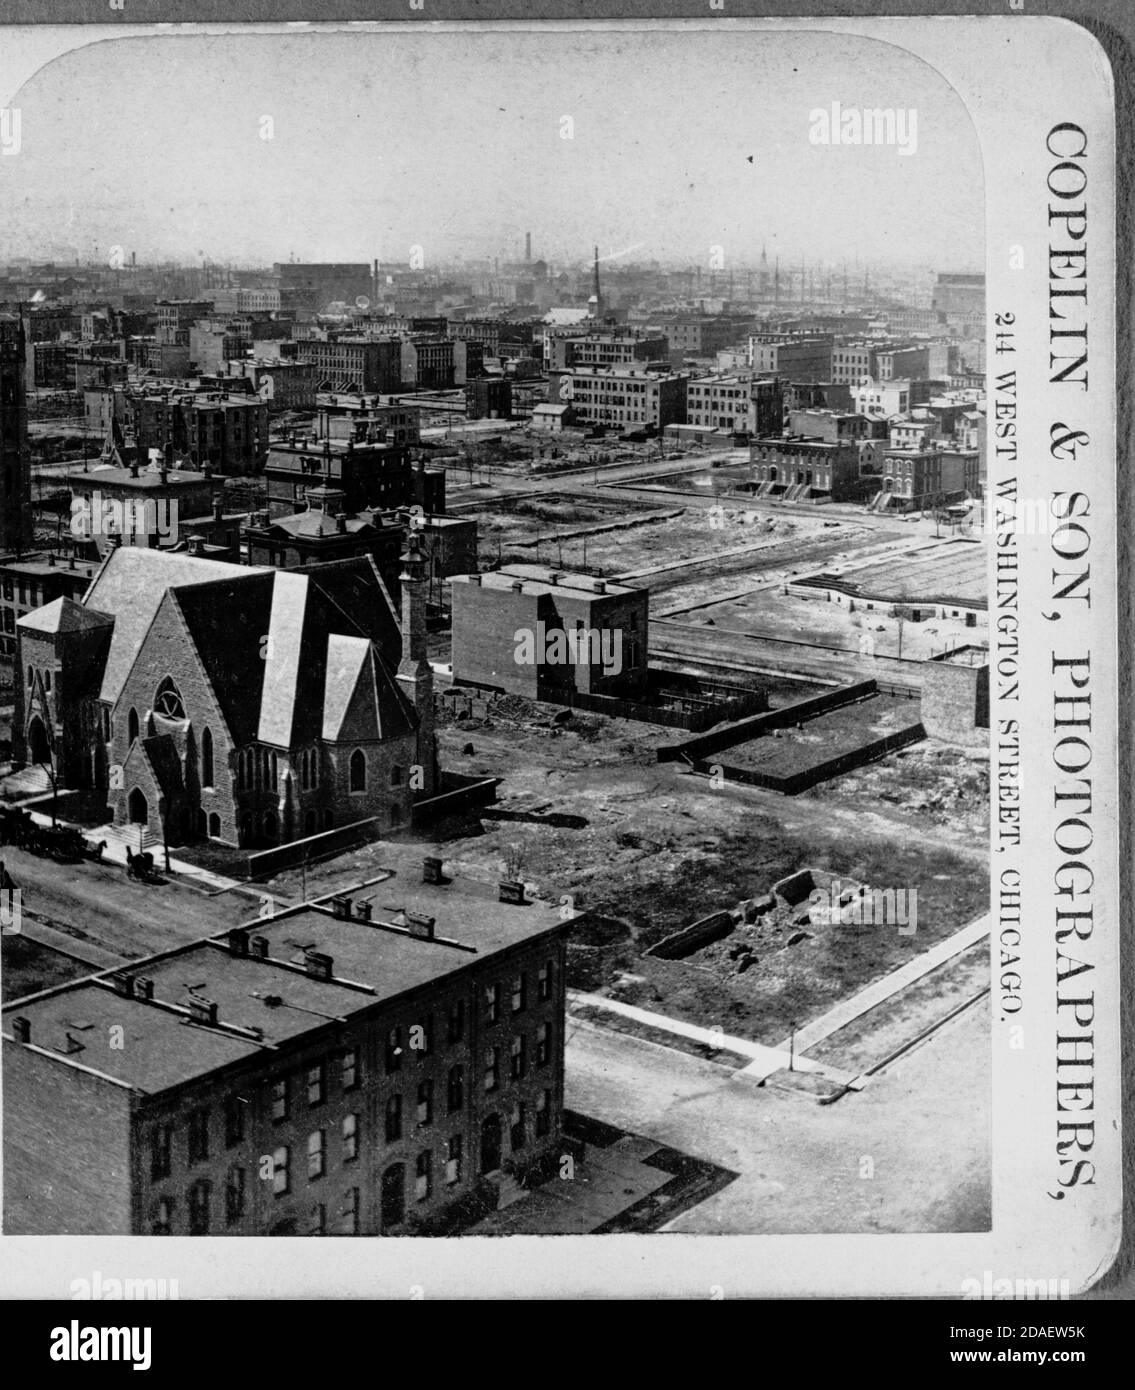 View southeast from Water Tower of the rebuilding of Chicago after the Fire of 1871, Chicago, Illinois. Stock Photo